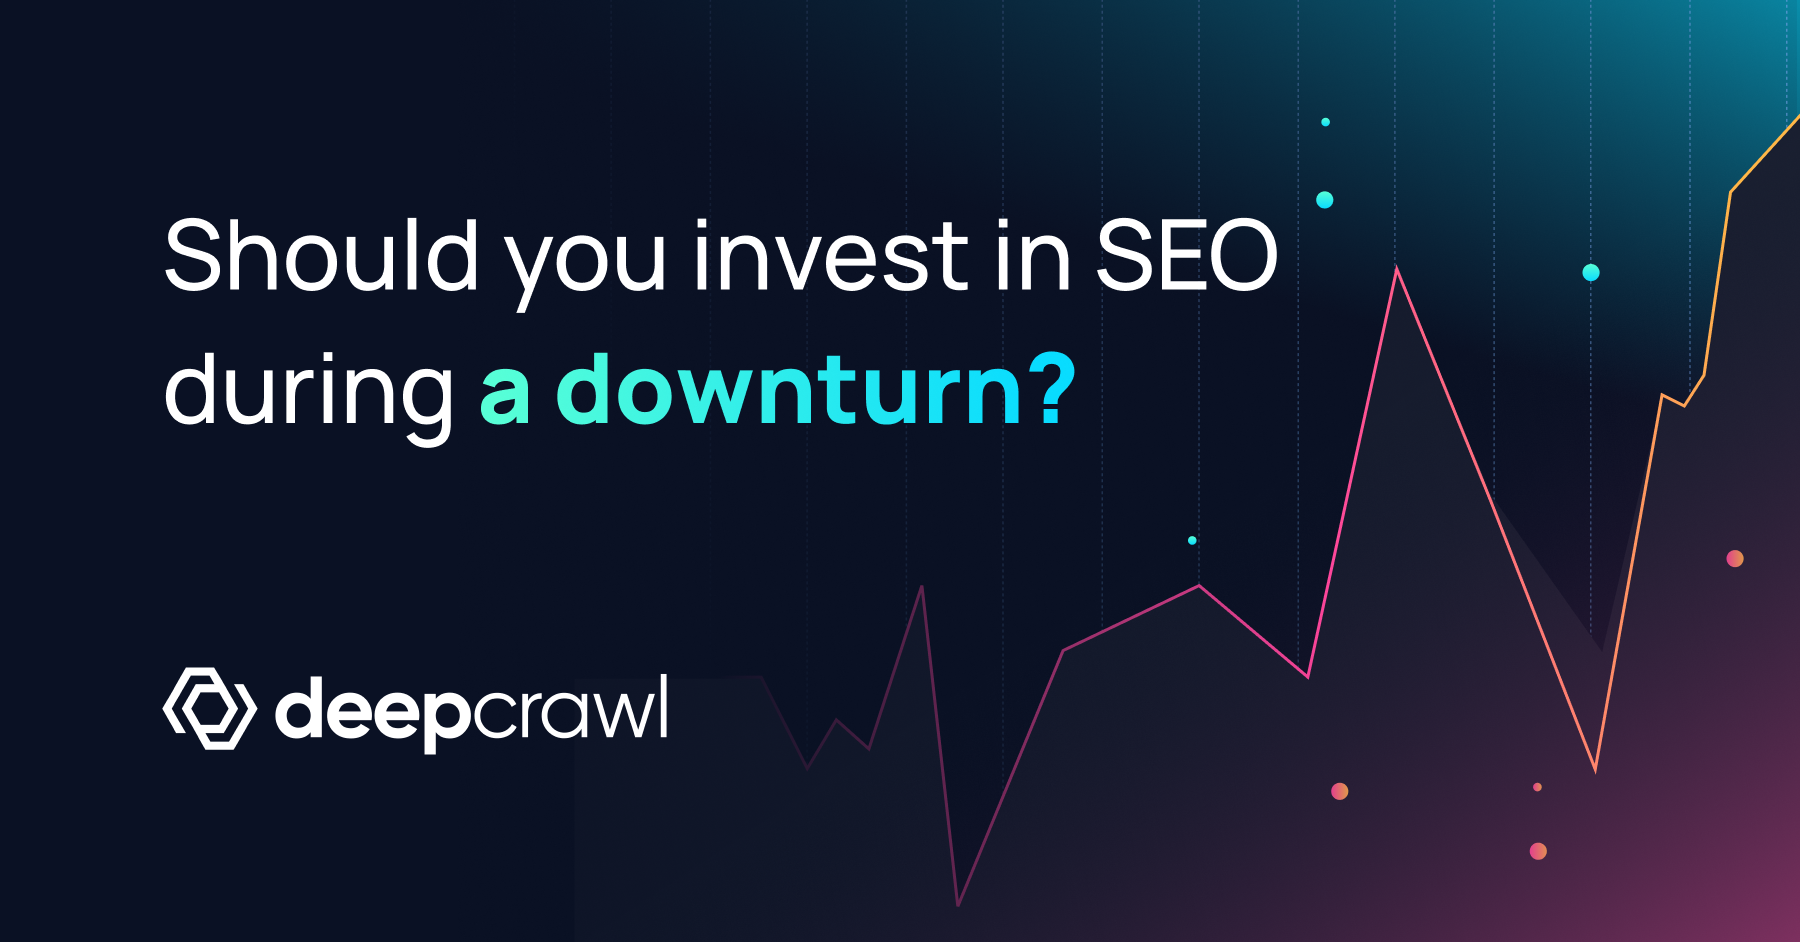 Should you still invest in SEO during an economic downturn or recession?